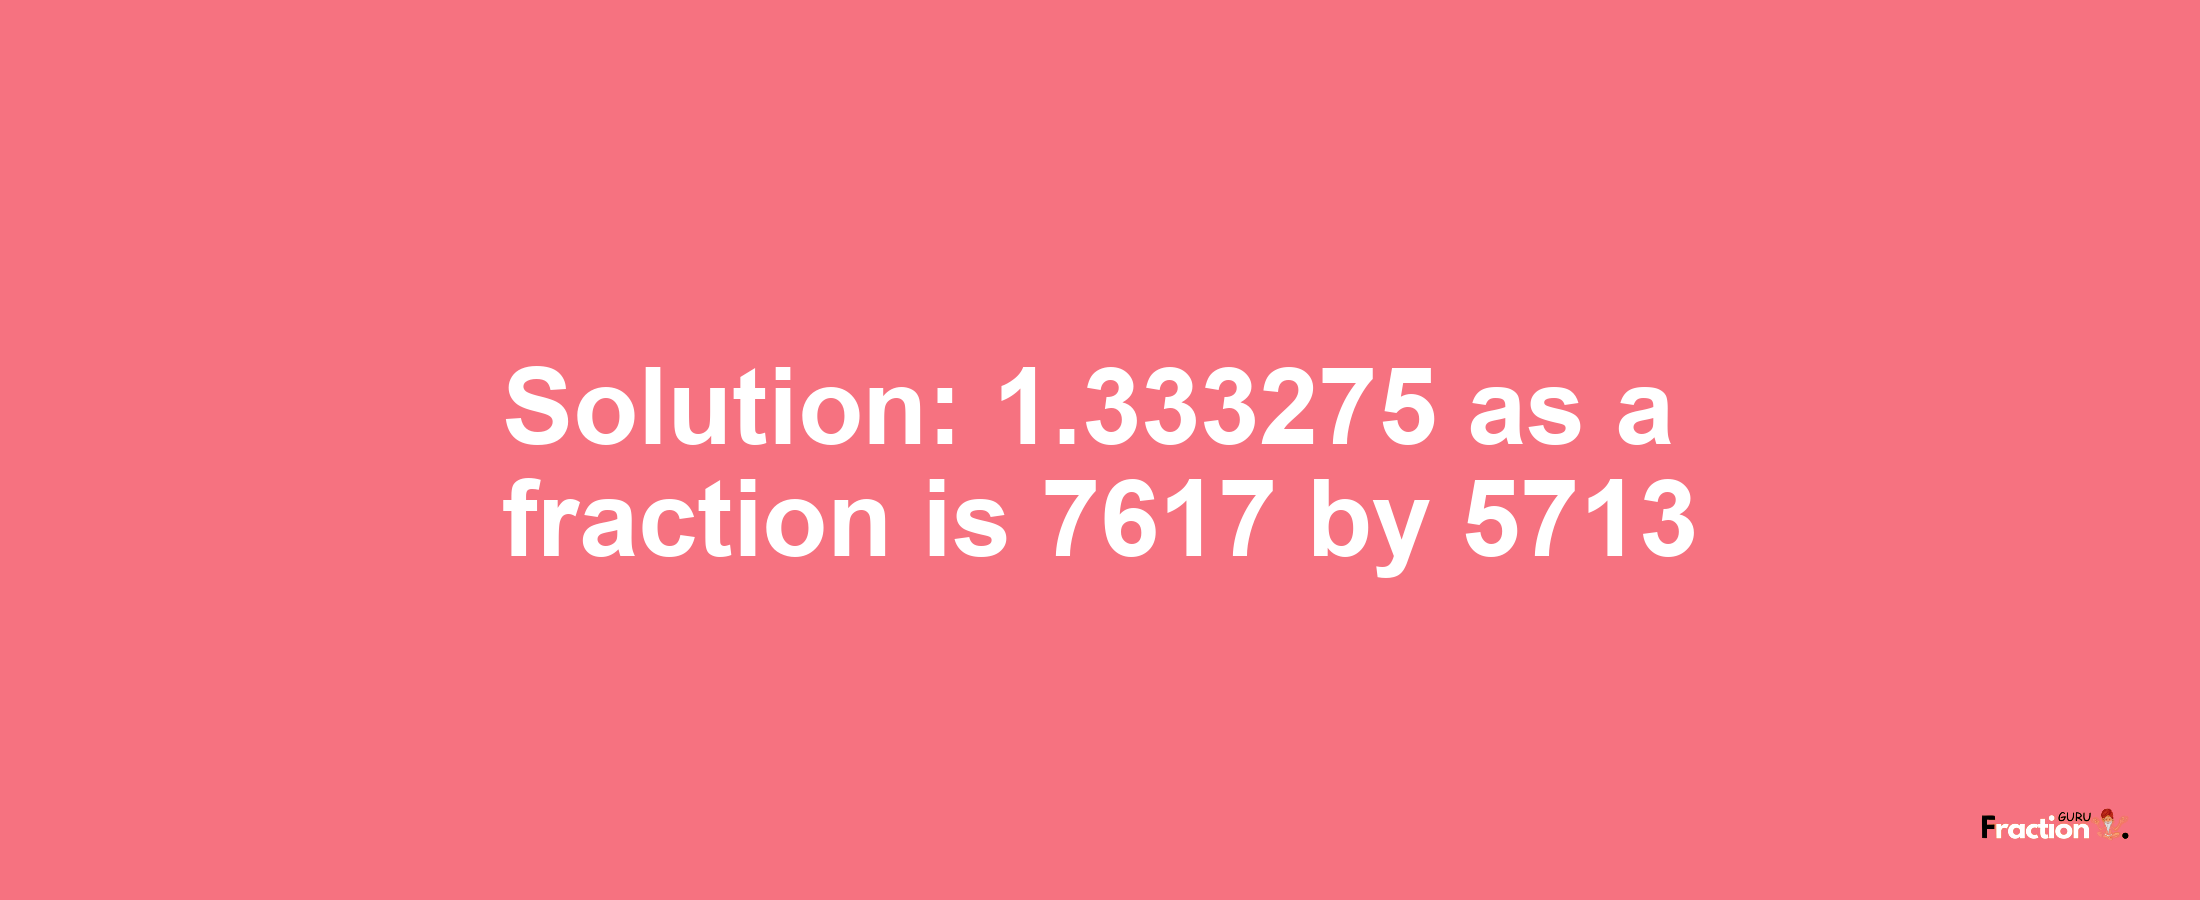 Solution:1.333275 as a fraction is 7617/5713